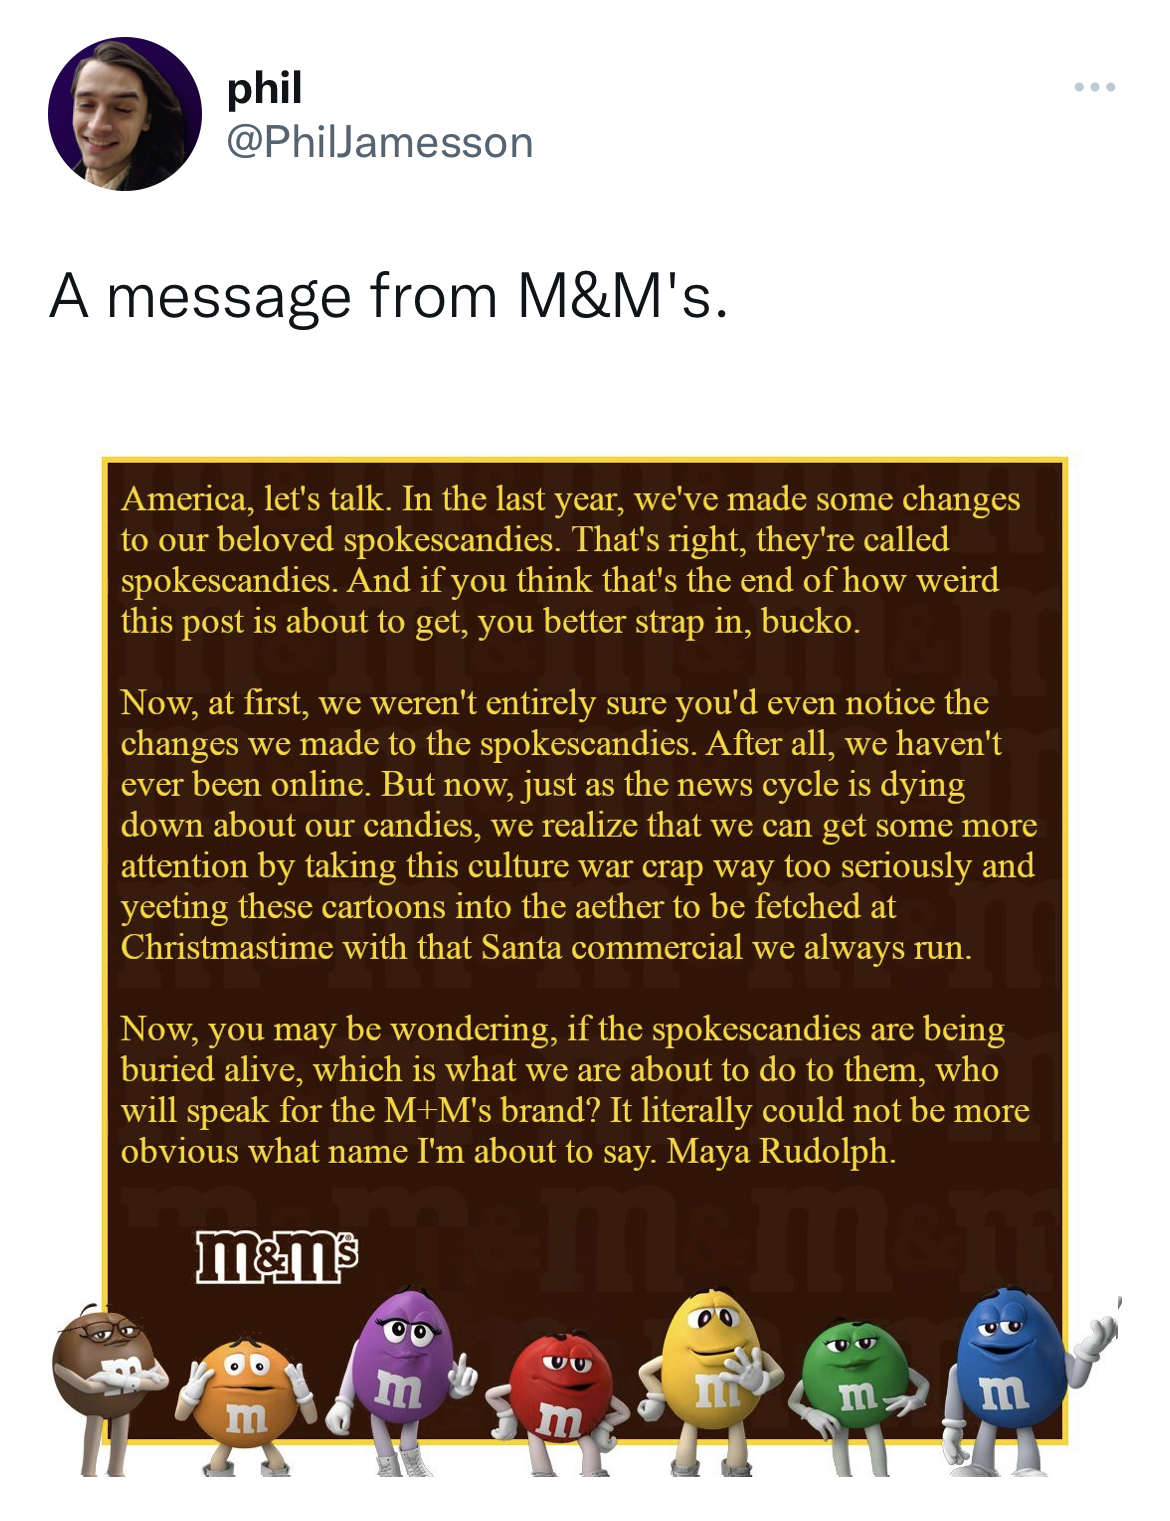 M&M's message spoofs - phil A message from M&M's. America, let's talk. In the last year, we've made some changes to our beloved spokescandies. That's right, they're called spokescandies. And if you think that's the end of how weird this post is about to g